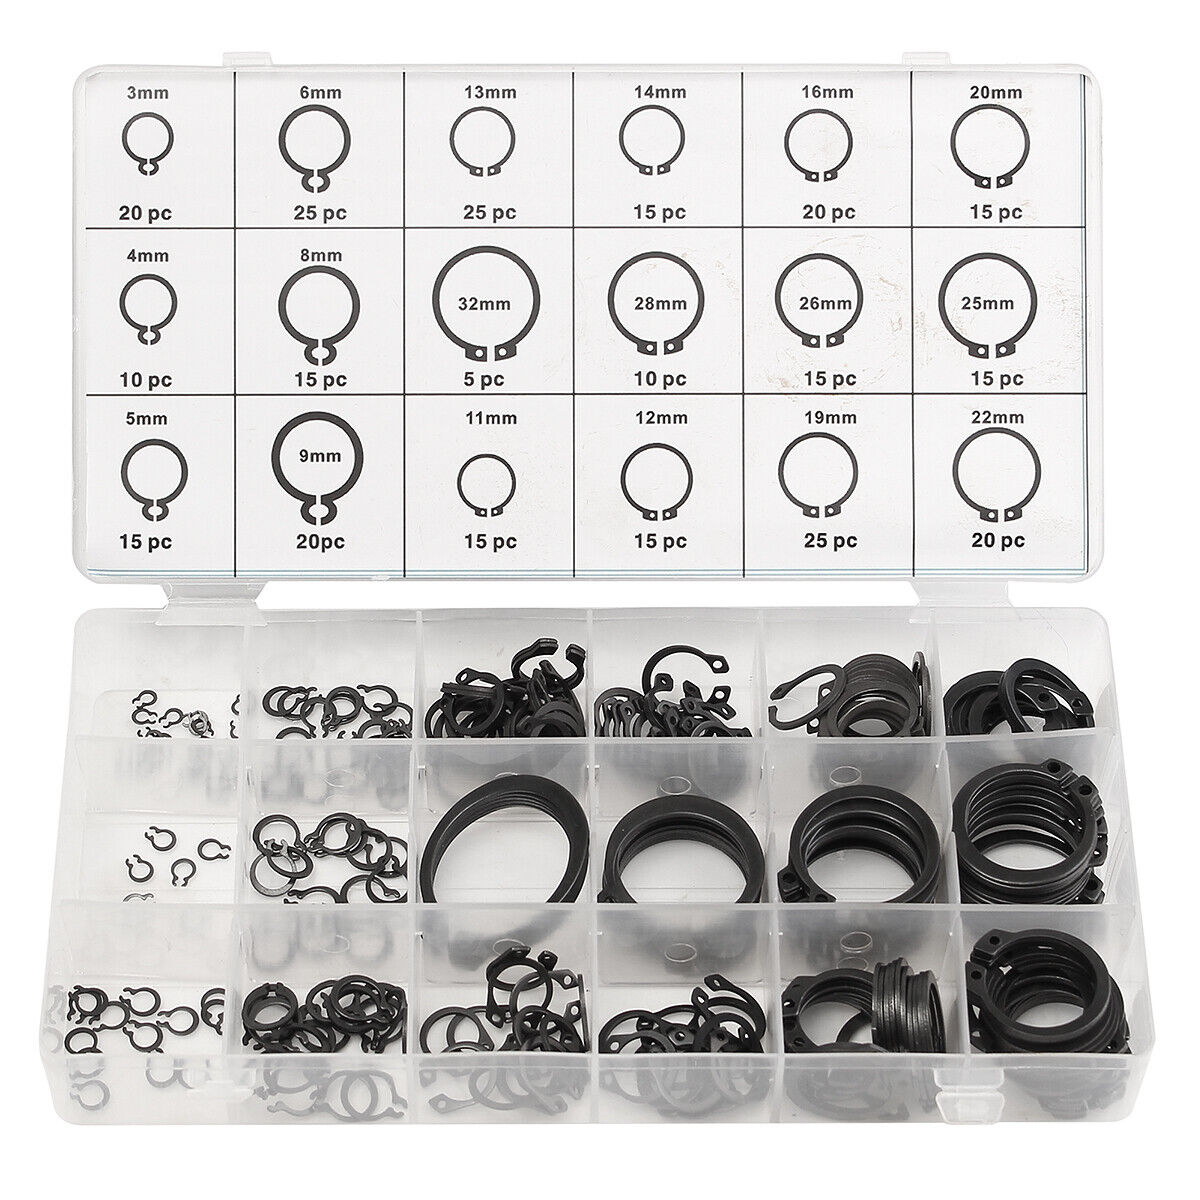 300pc 3-32mm 18 Metric Sizes External Circlip Snap Retaining Ring Assortment Kit - South East Clearance Centre